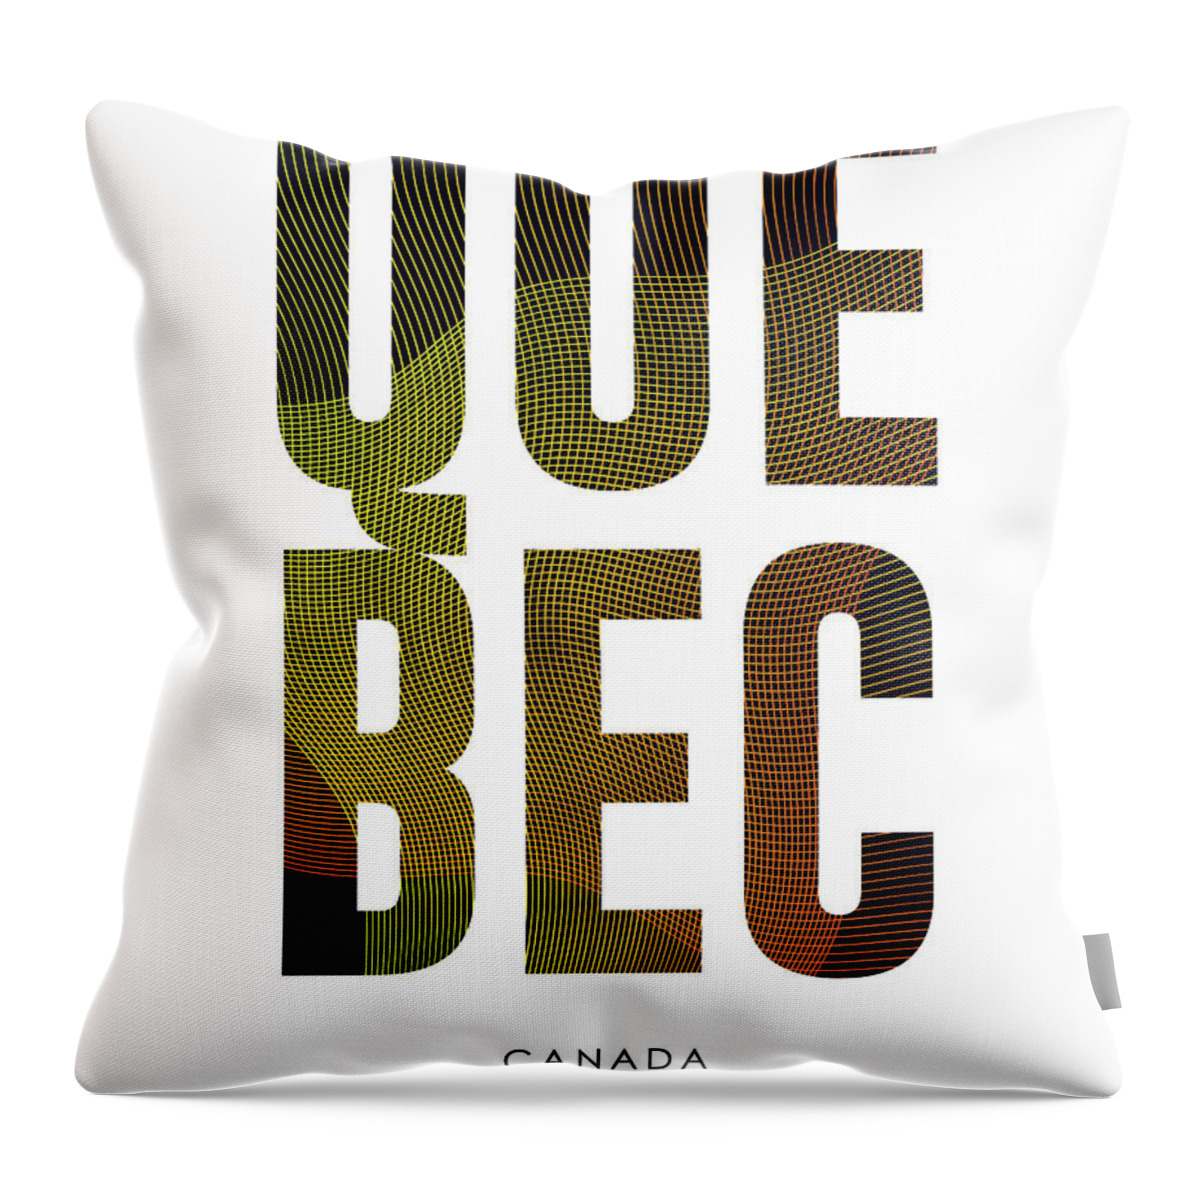 Quebec Throw Pillow featuring the mixed media Quebec, Canada - City Name Typography - Minimalist City Posters by Studio Grafiikka